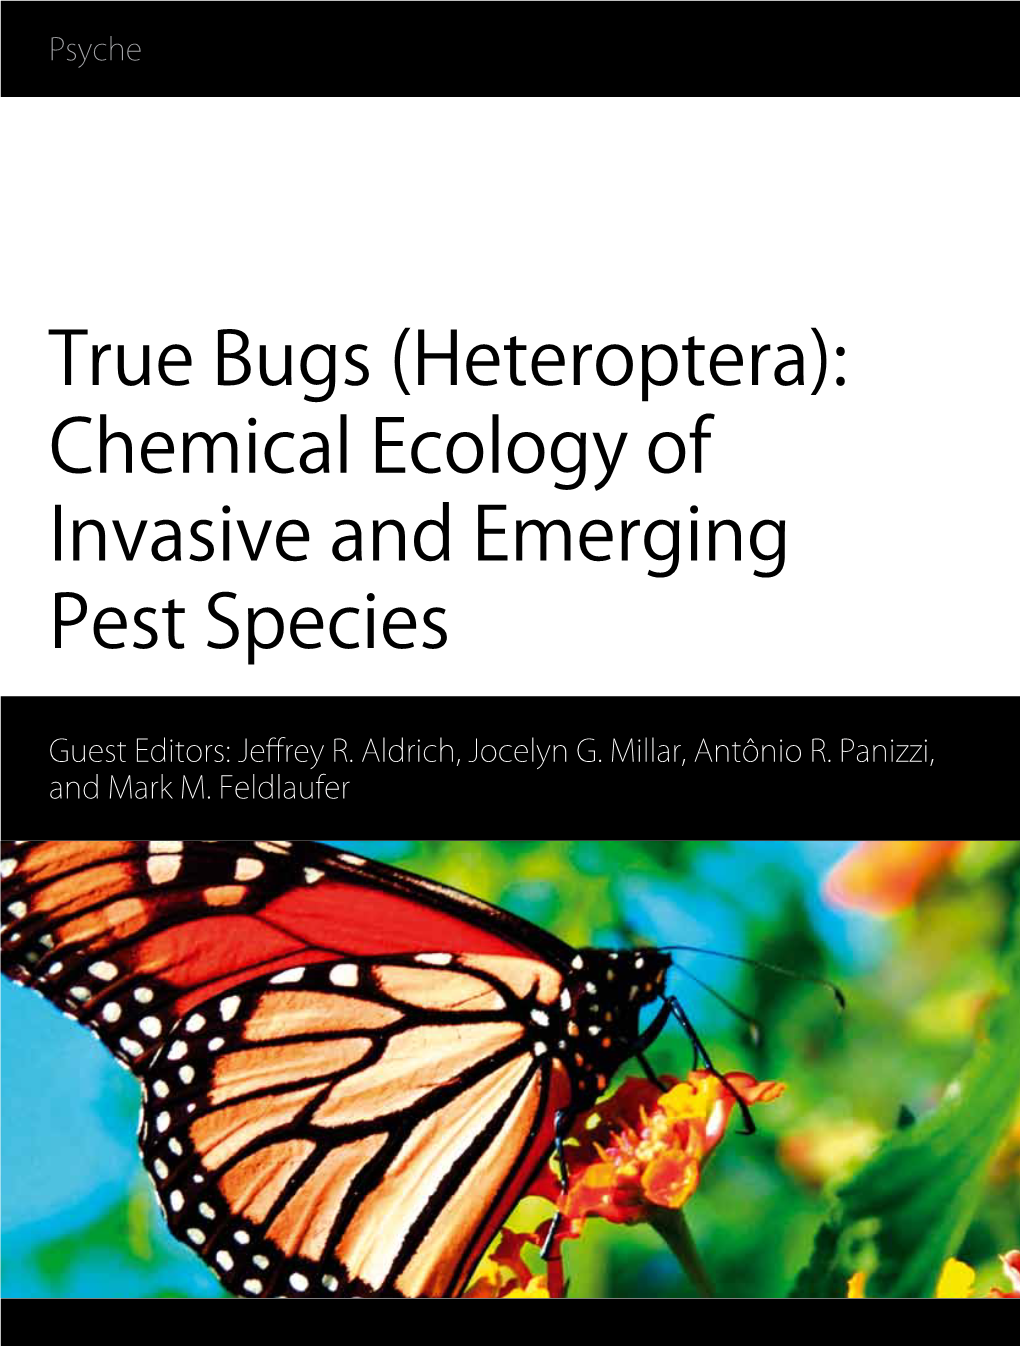 True Bugs (Heteroptera): Chemical Ecology of Invasive and Emerging Pest Species